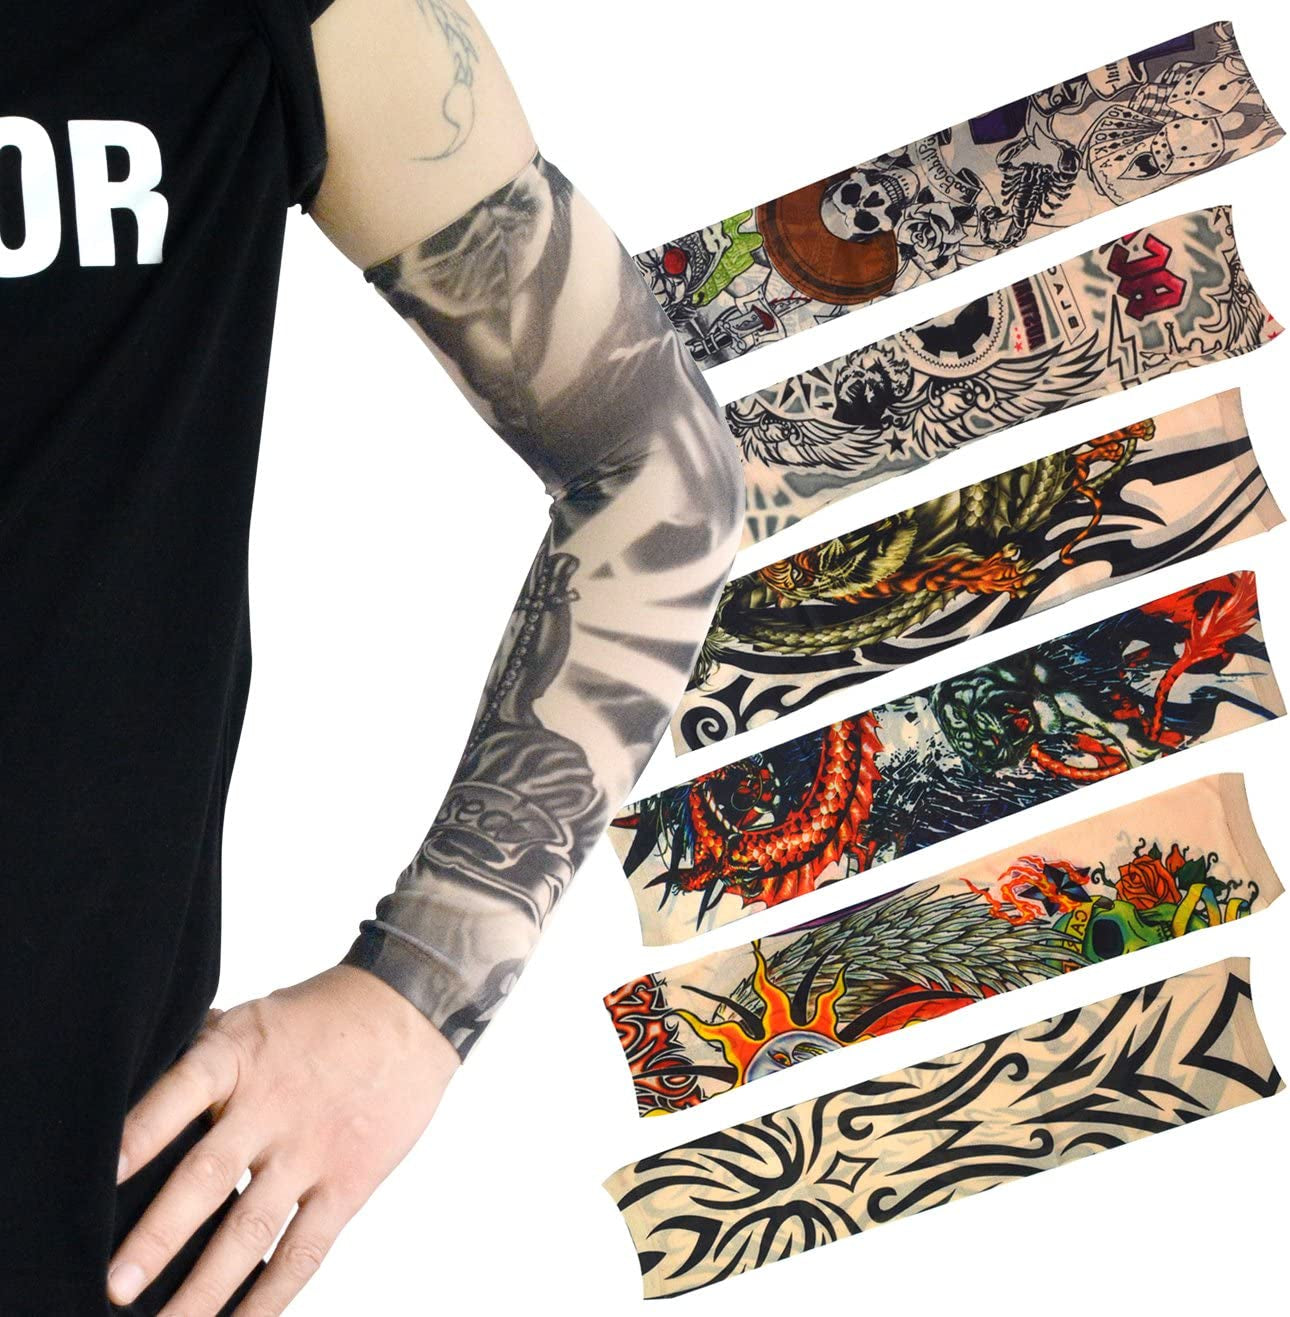 20pcs Temporary Tattoo Arm Sleeves Arts Fake Slip on Arm Sunscreen Sleeves Unisex Stretchable A